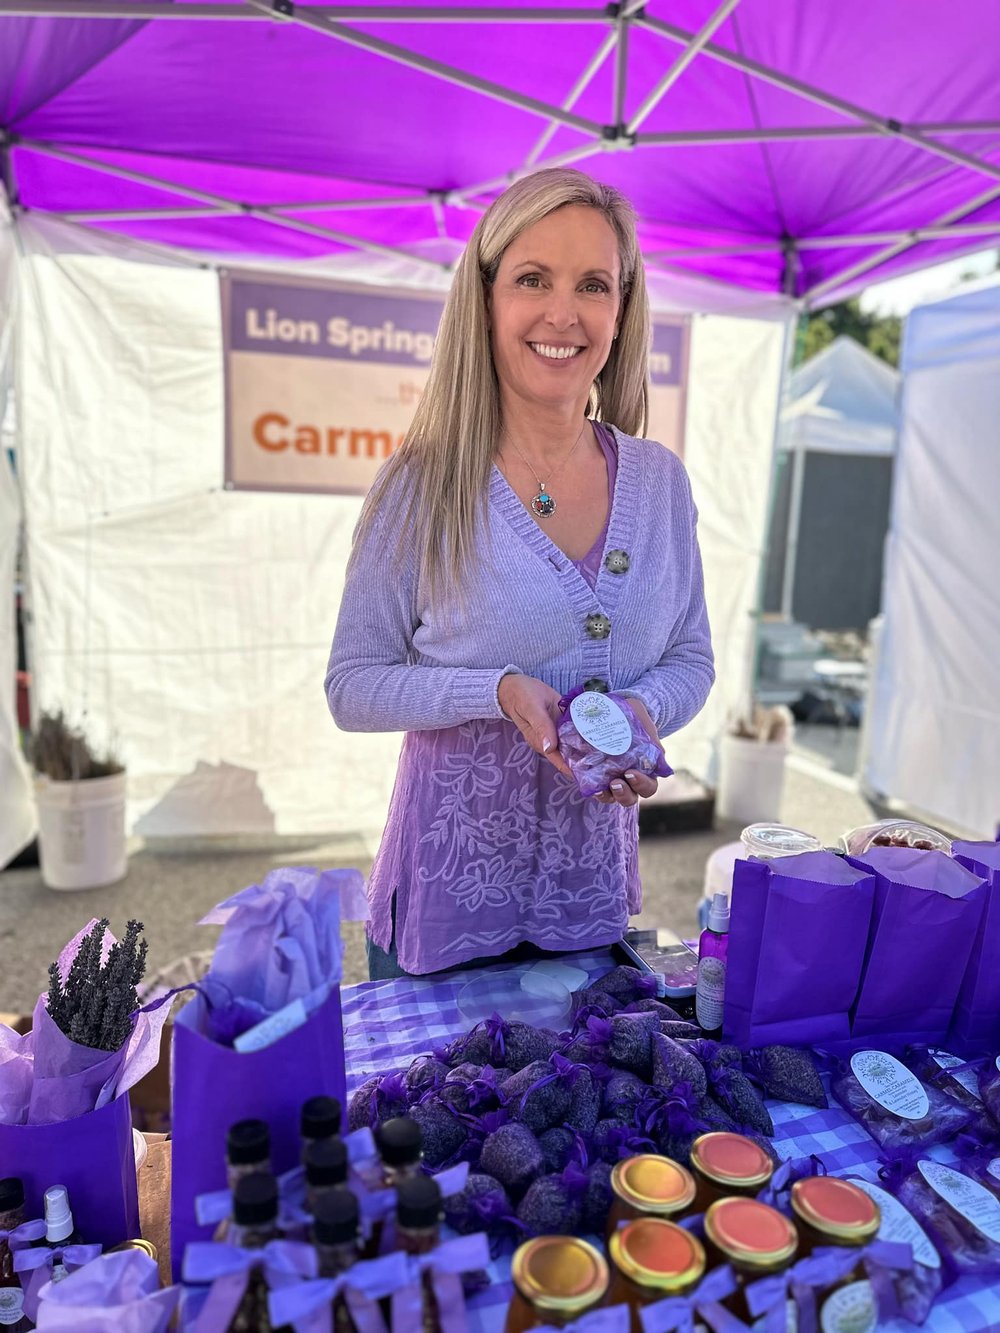  Bought some homemade lavender caramels at an outdoor craft market for an upcoming holiday gift exchange. 